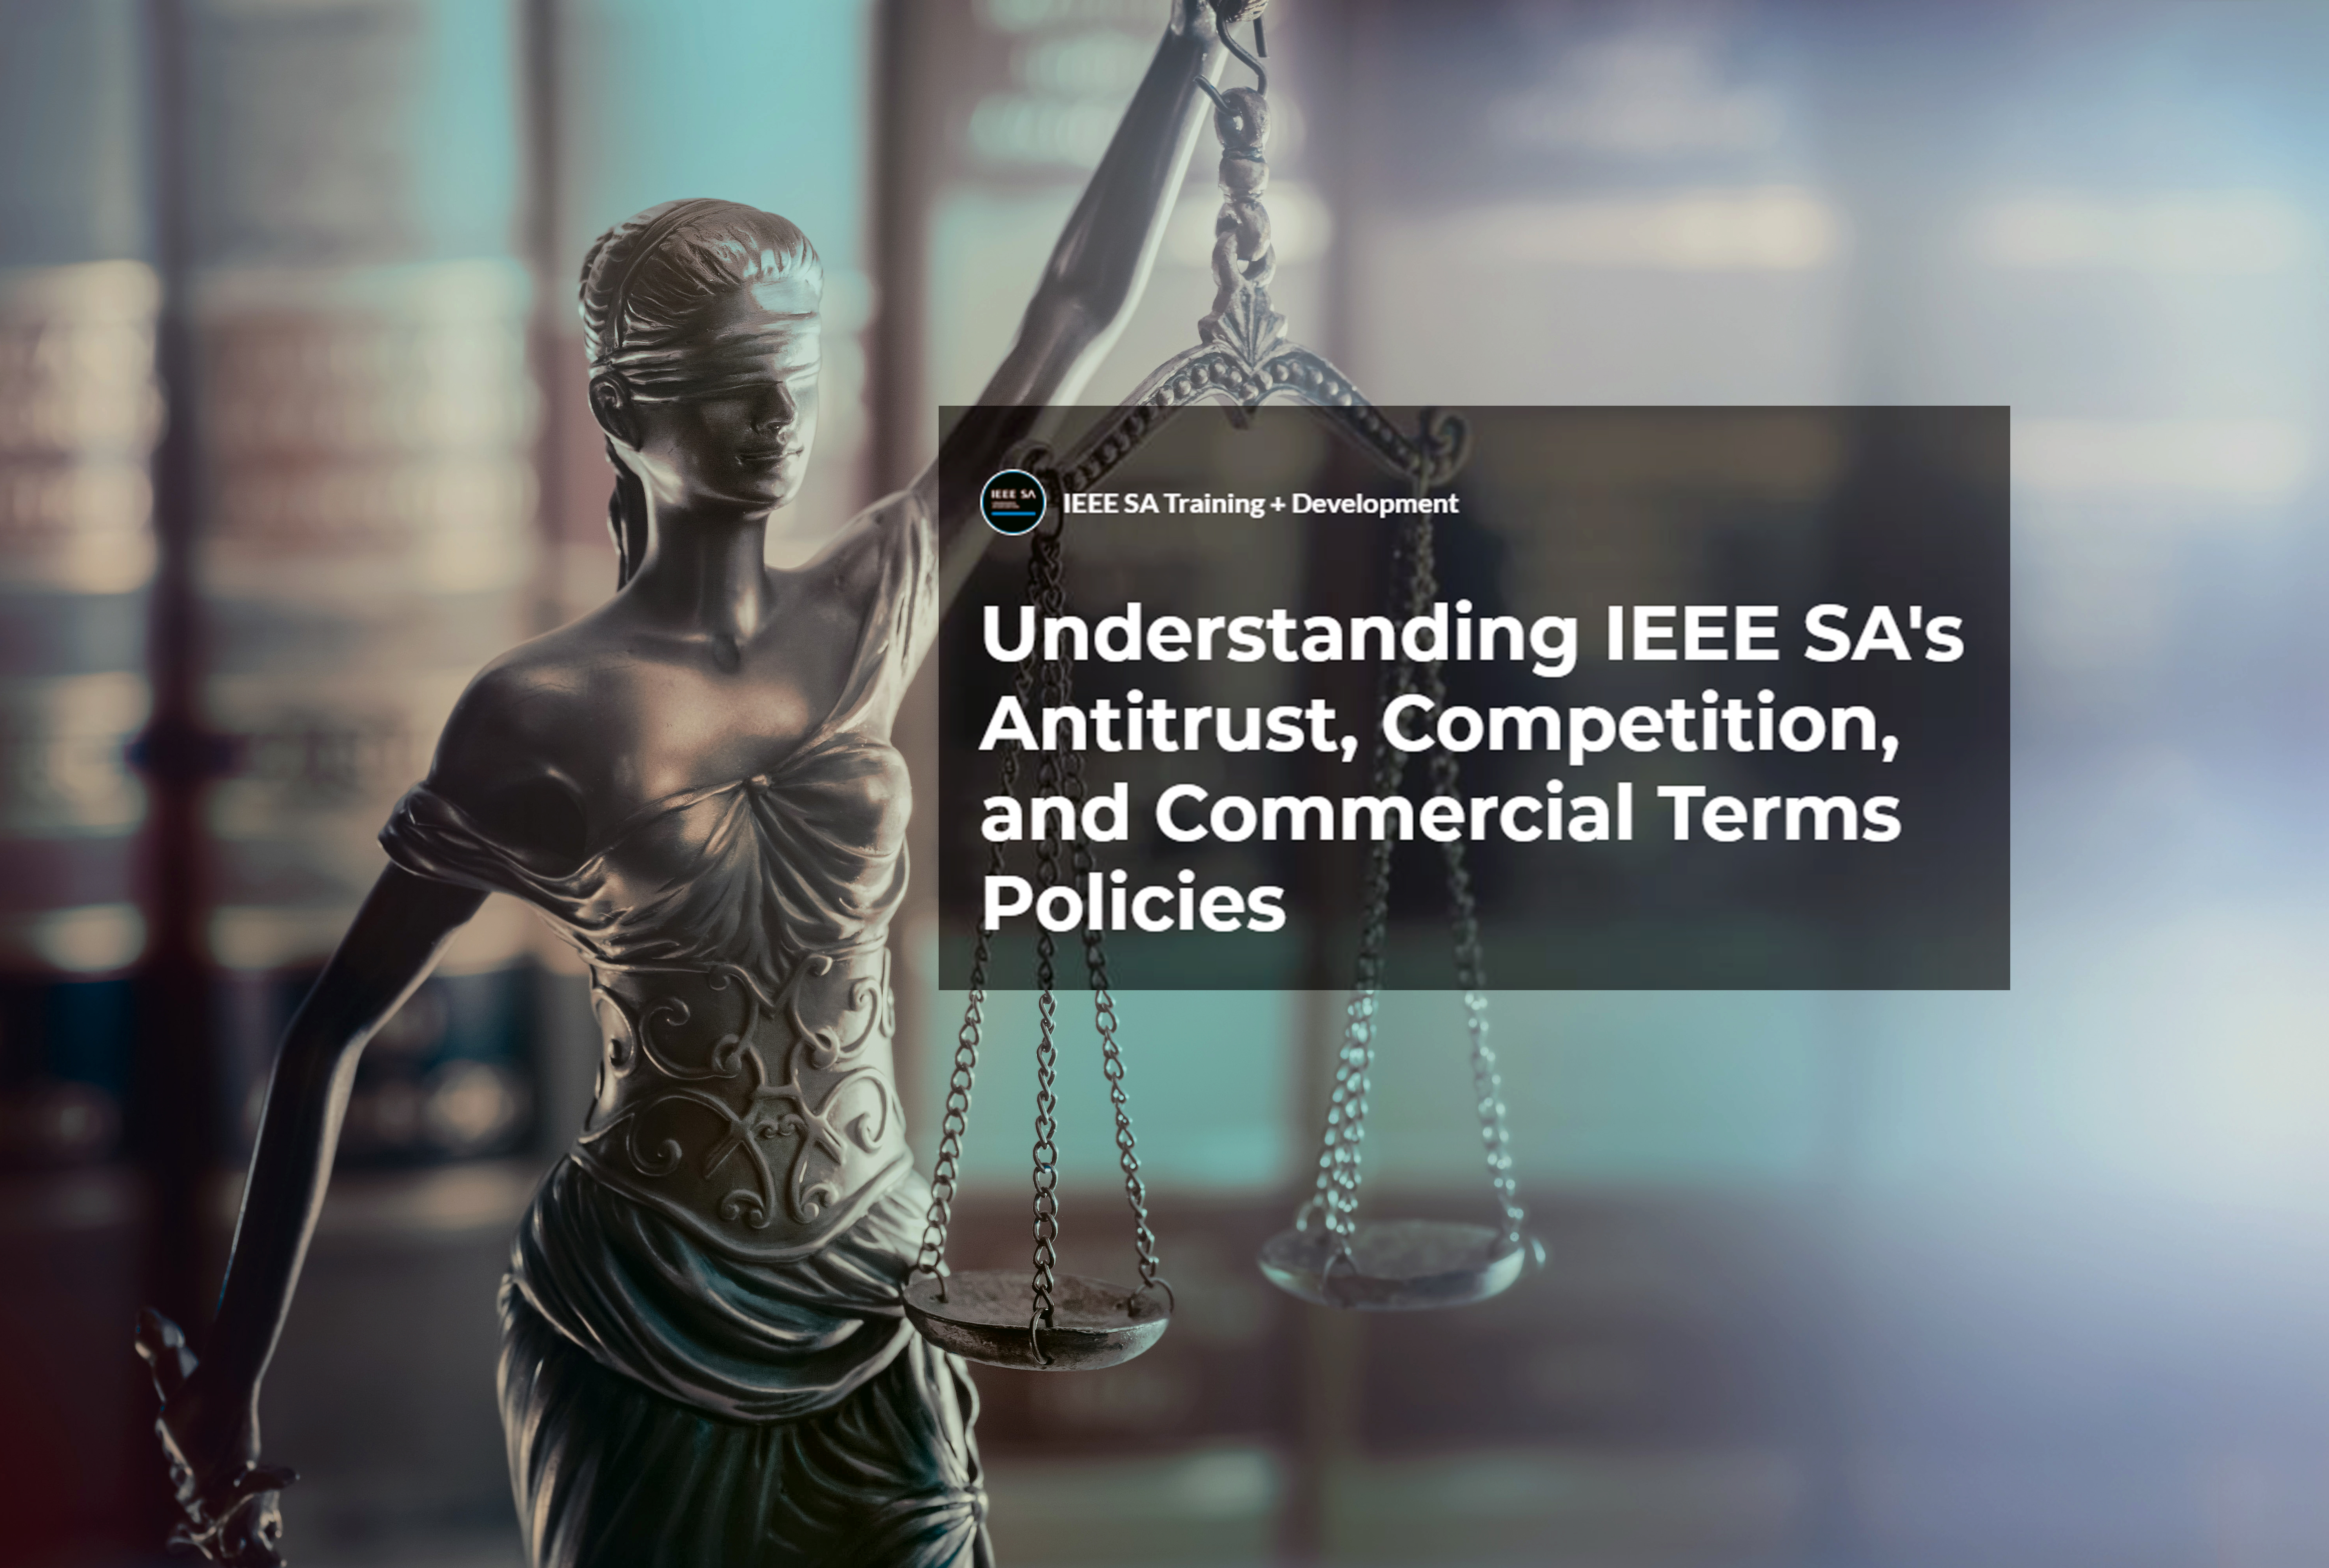 Understanding IEEE SA's Antitrust, Competition, and Commercial Terms Policies (Japanese)